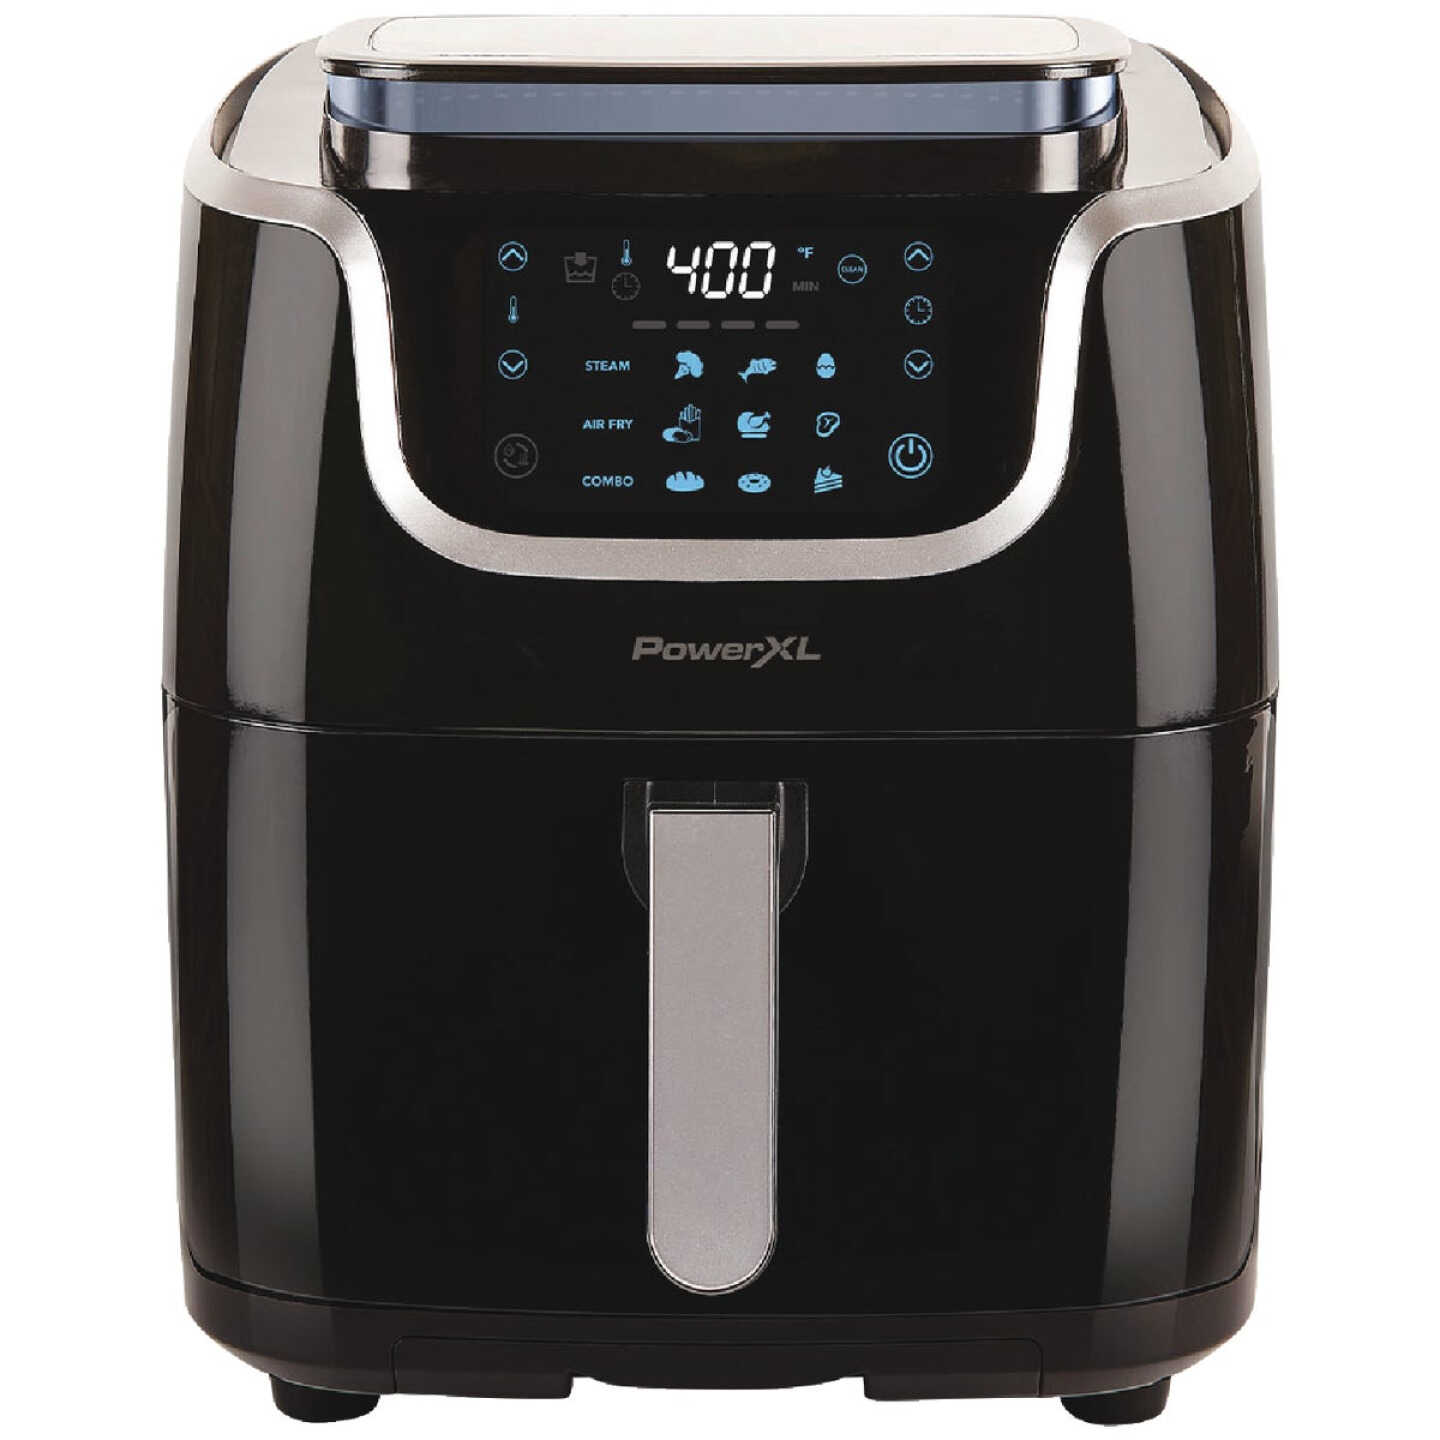 PowerXL AirFryer XL Air Fryer Review - Consumer Reports